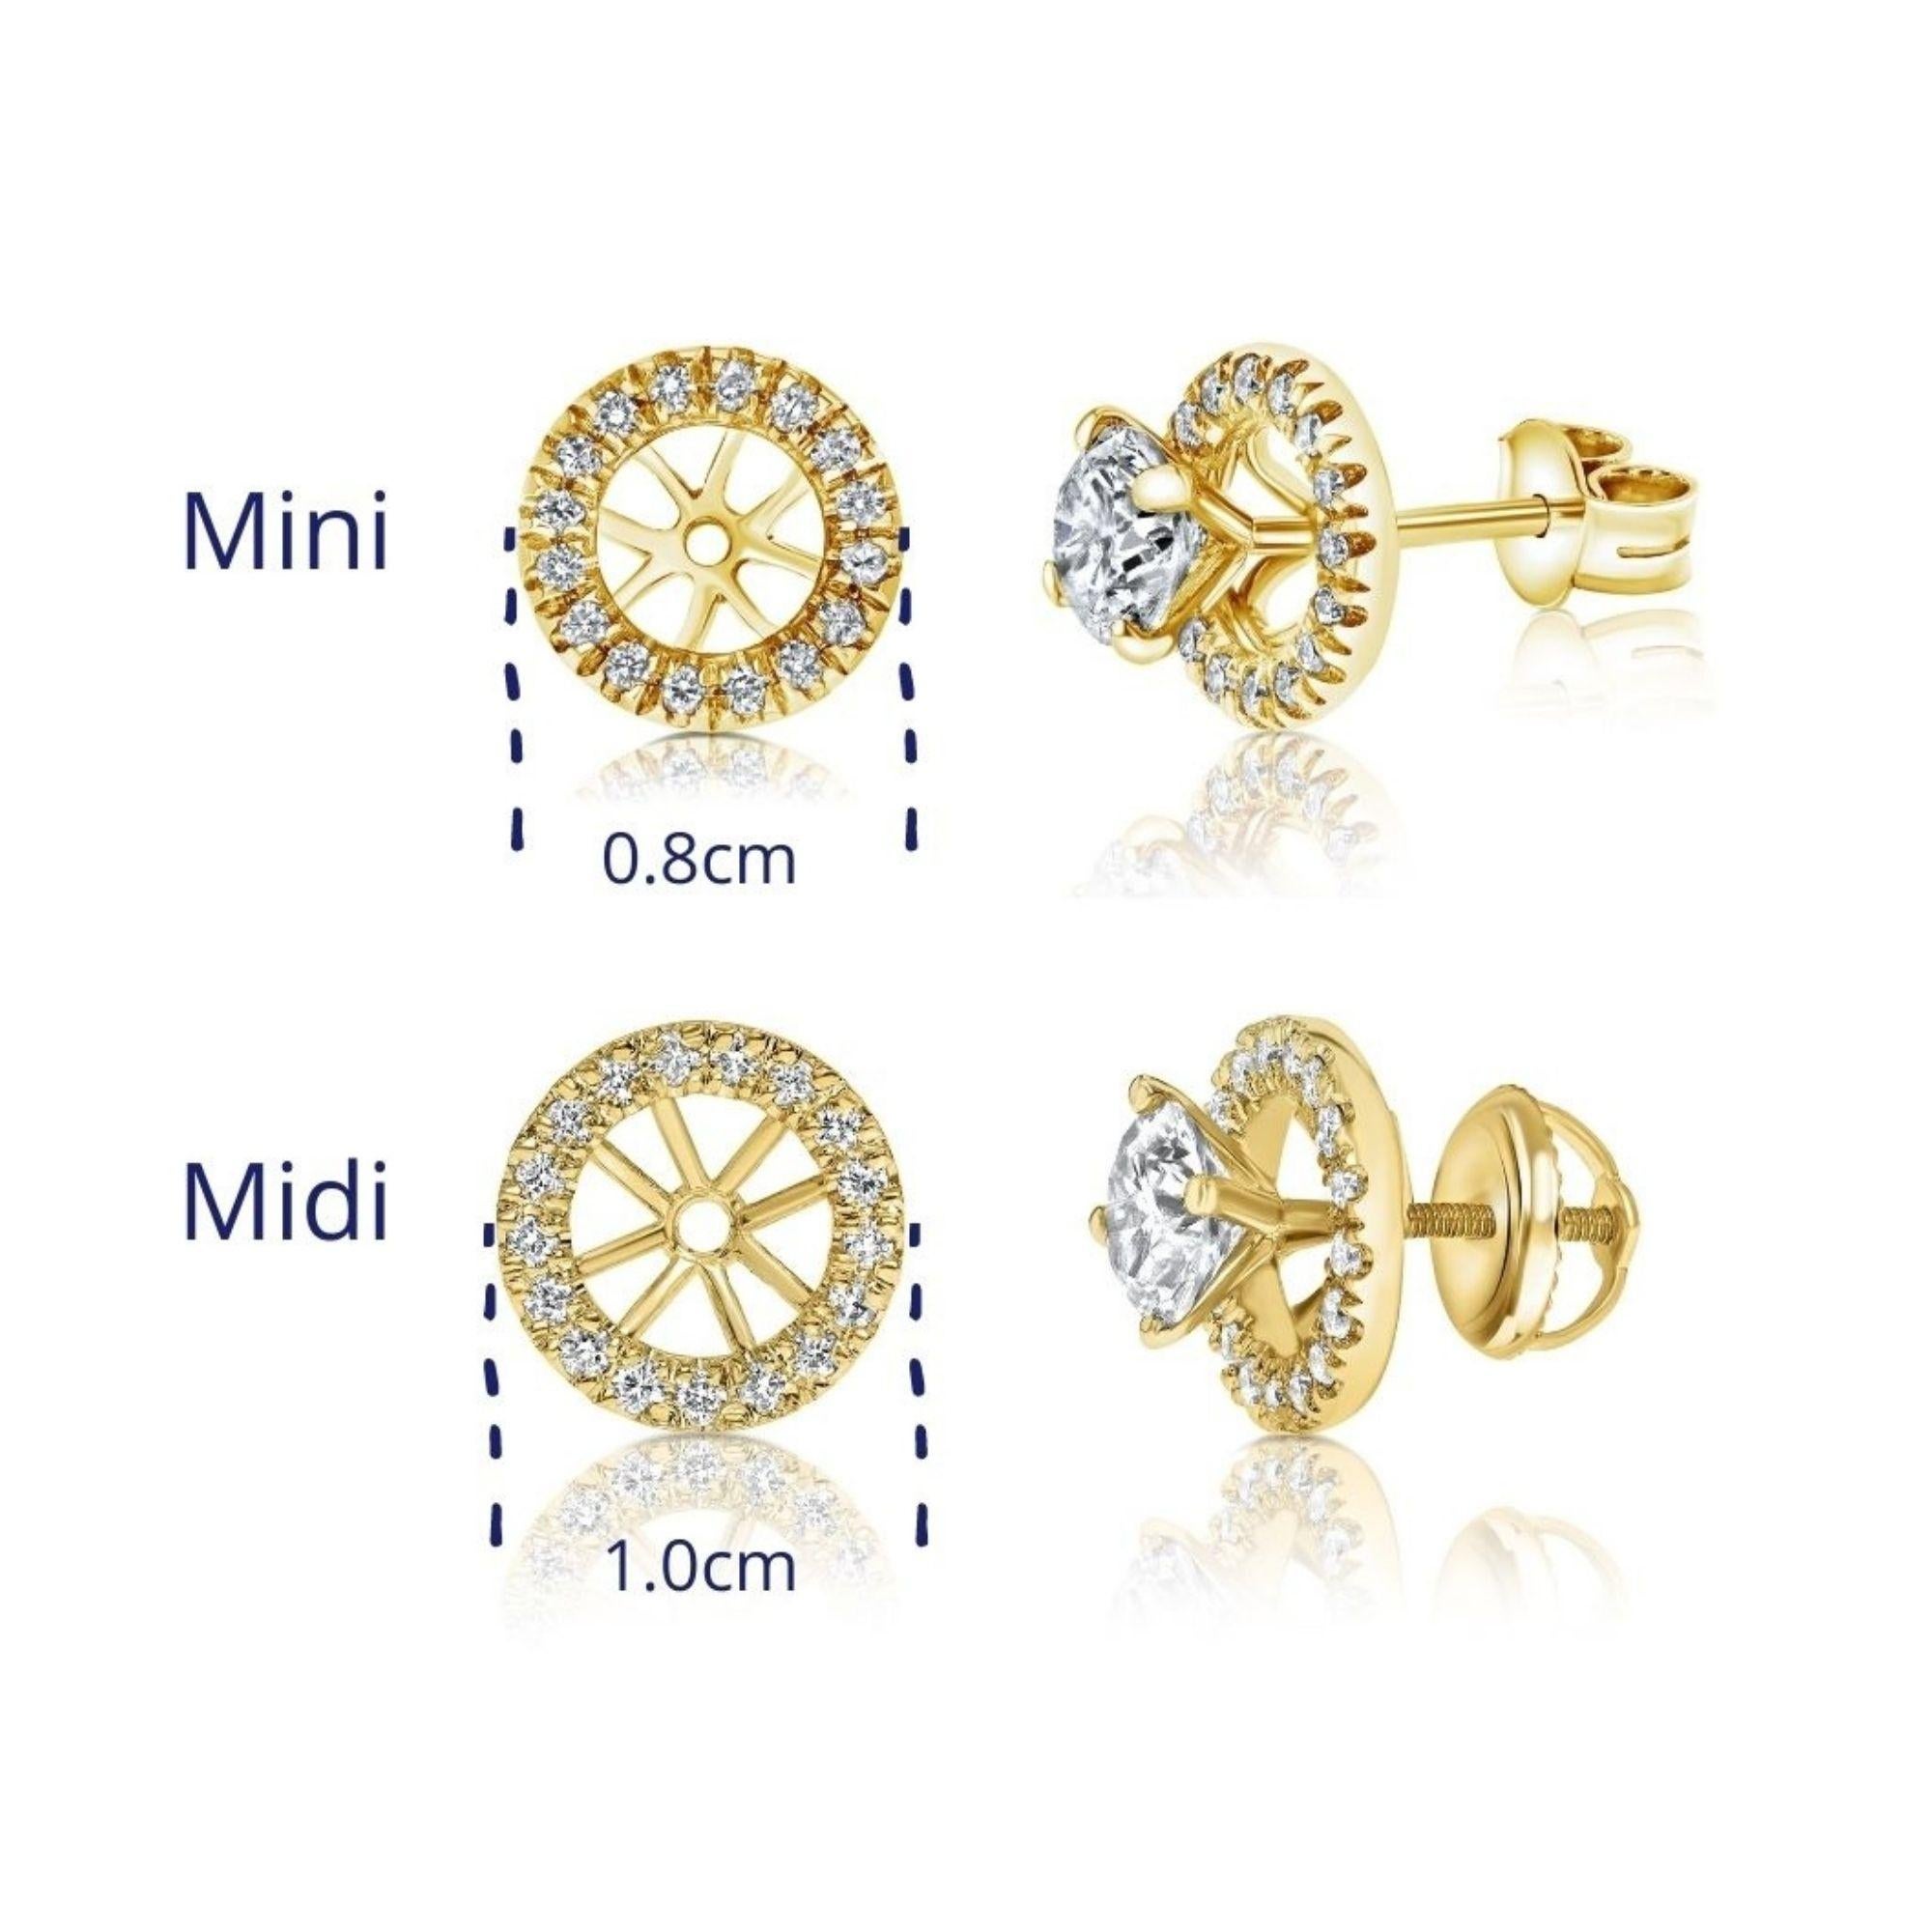 0.22 Carat Mini Round Diamond Ear Jacket Add-On in 14 Karat Yellow Gold, Shlomit Rogel

Jazz up your ear! Delicately embellished with white diamonds, this round 14k yellow gold ear extension will complete your stud earrings. You can add your own